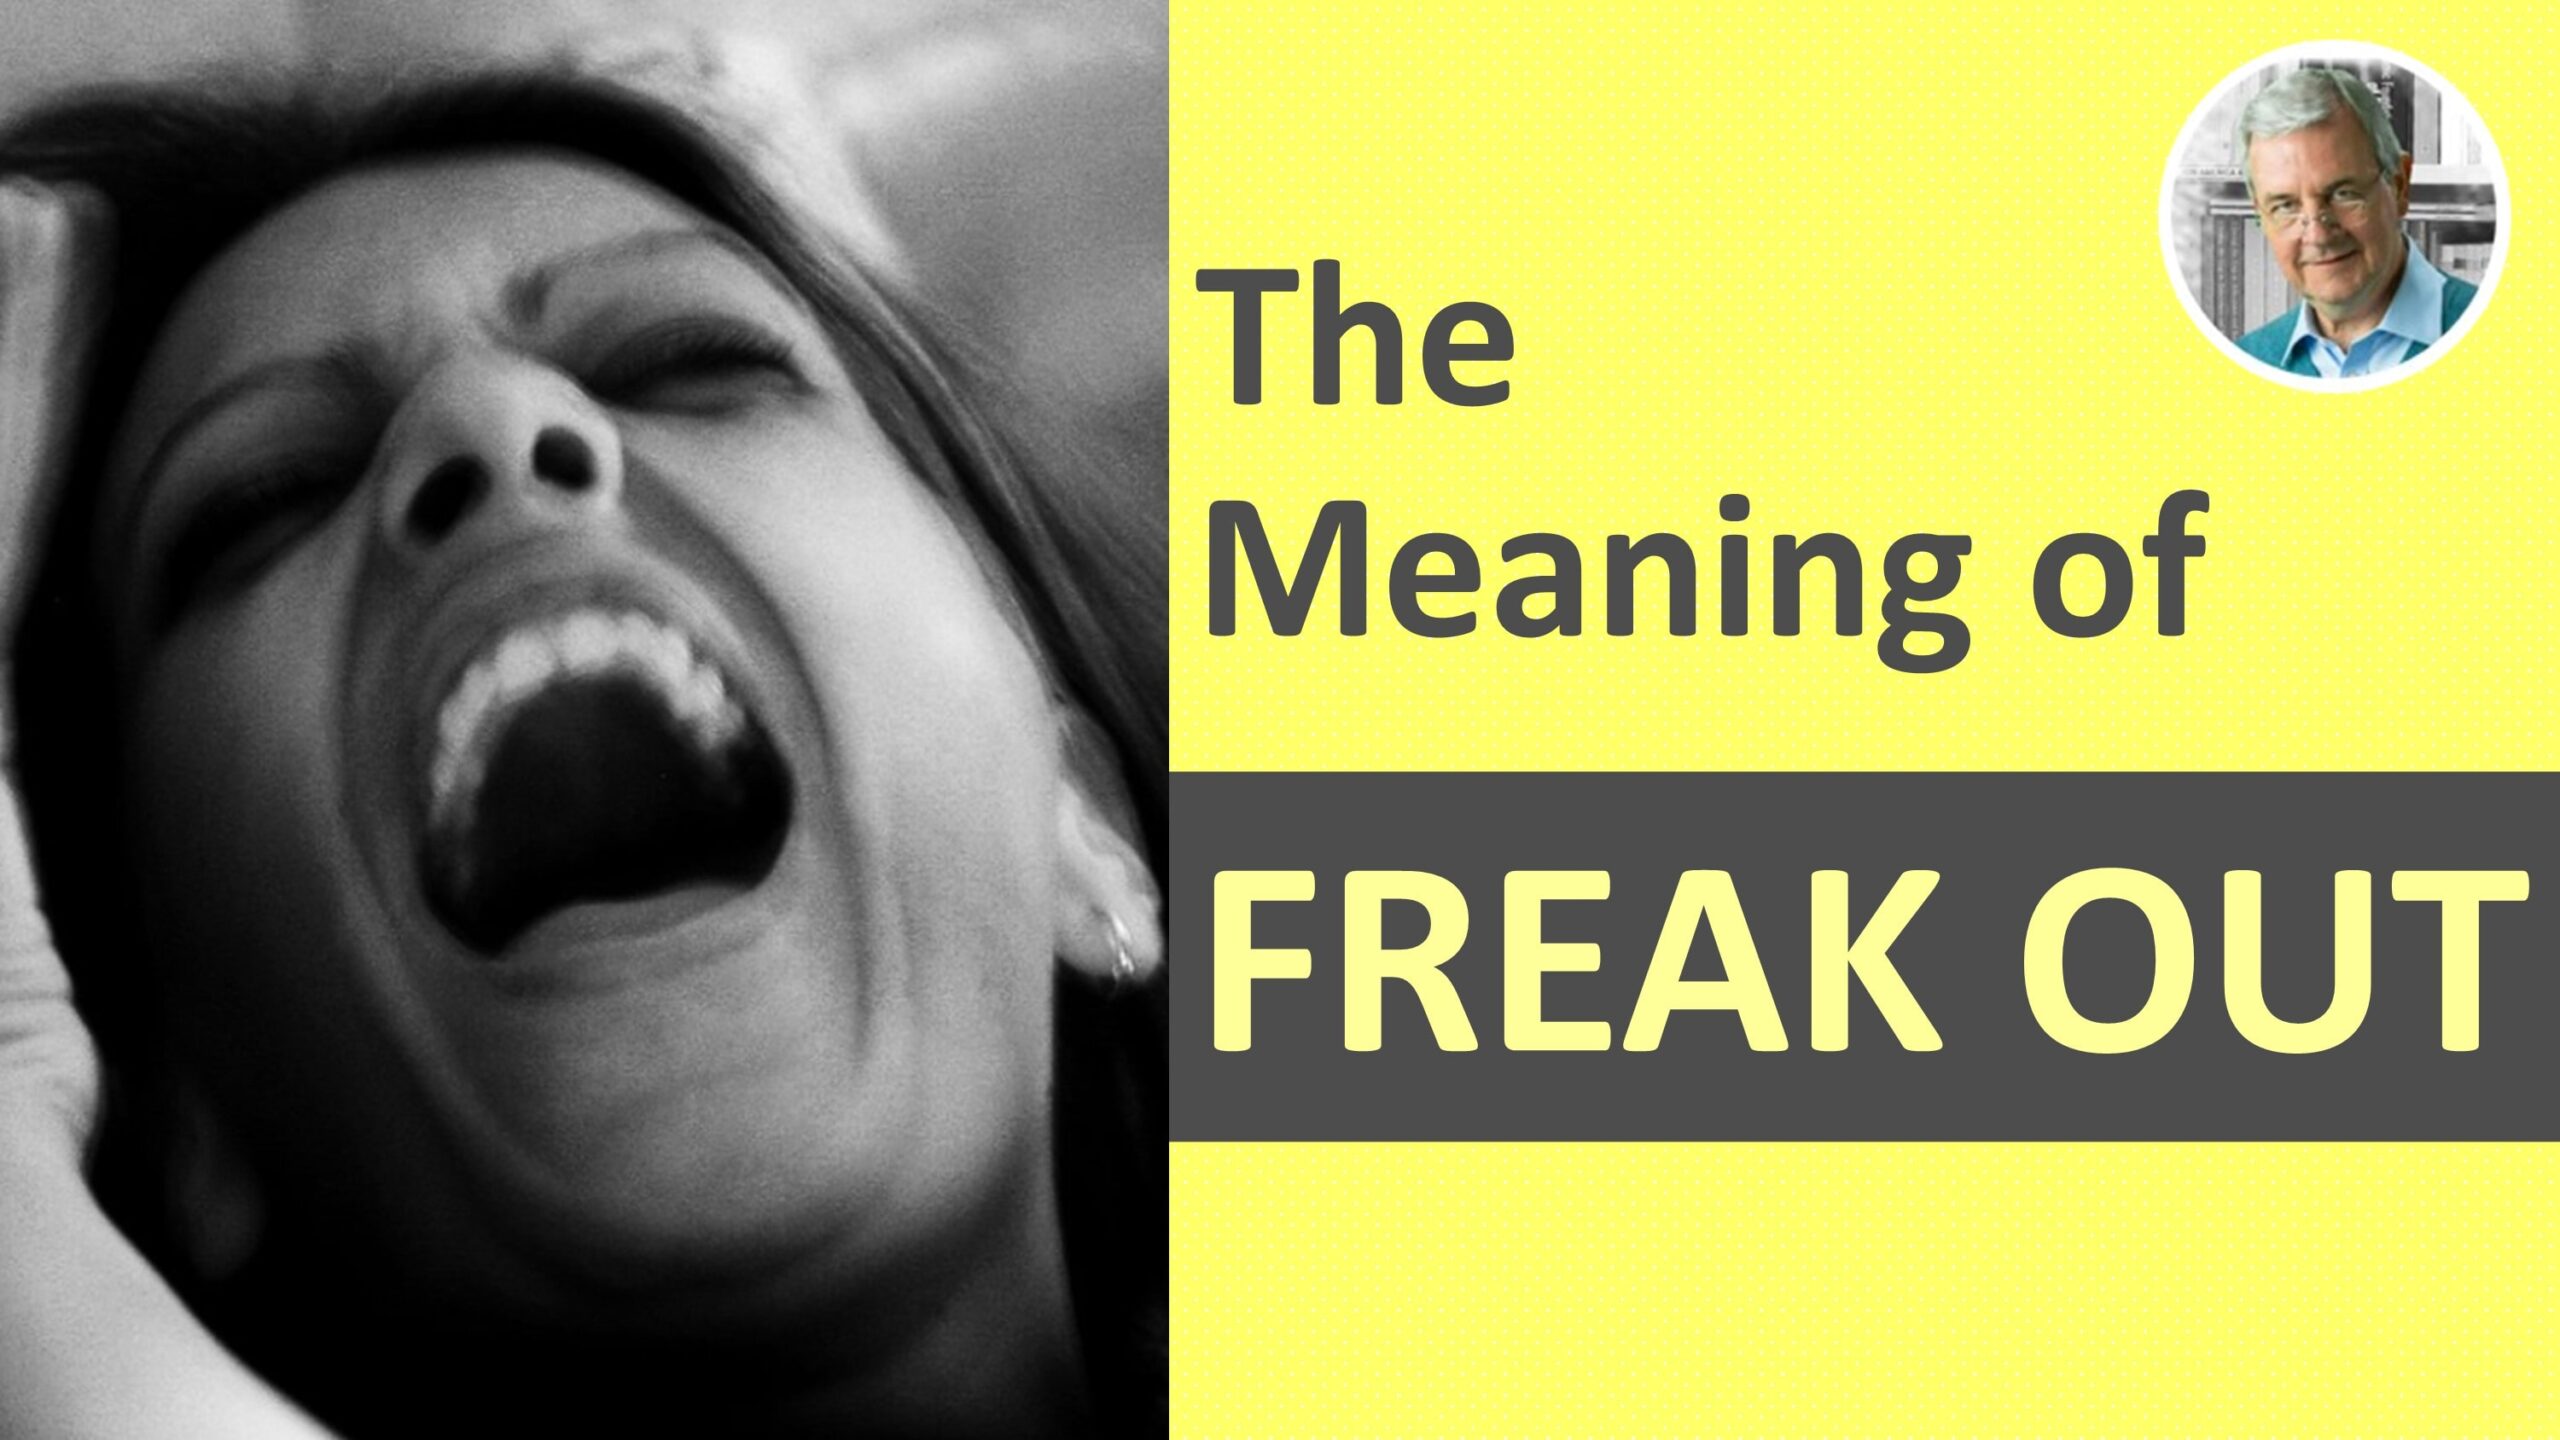 freak out meaning in english